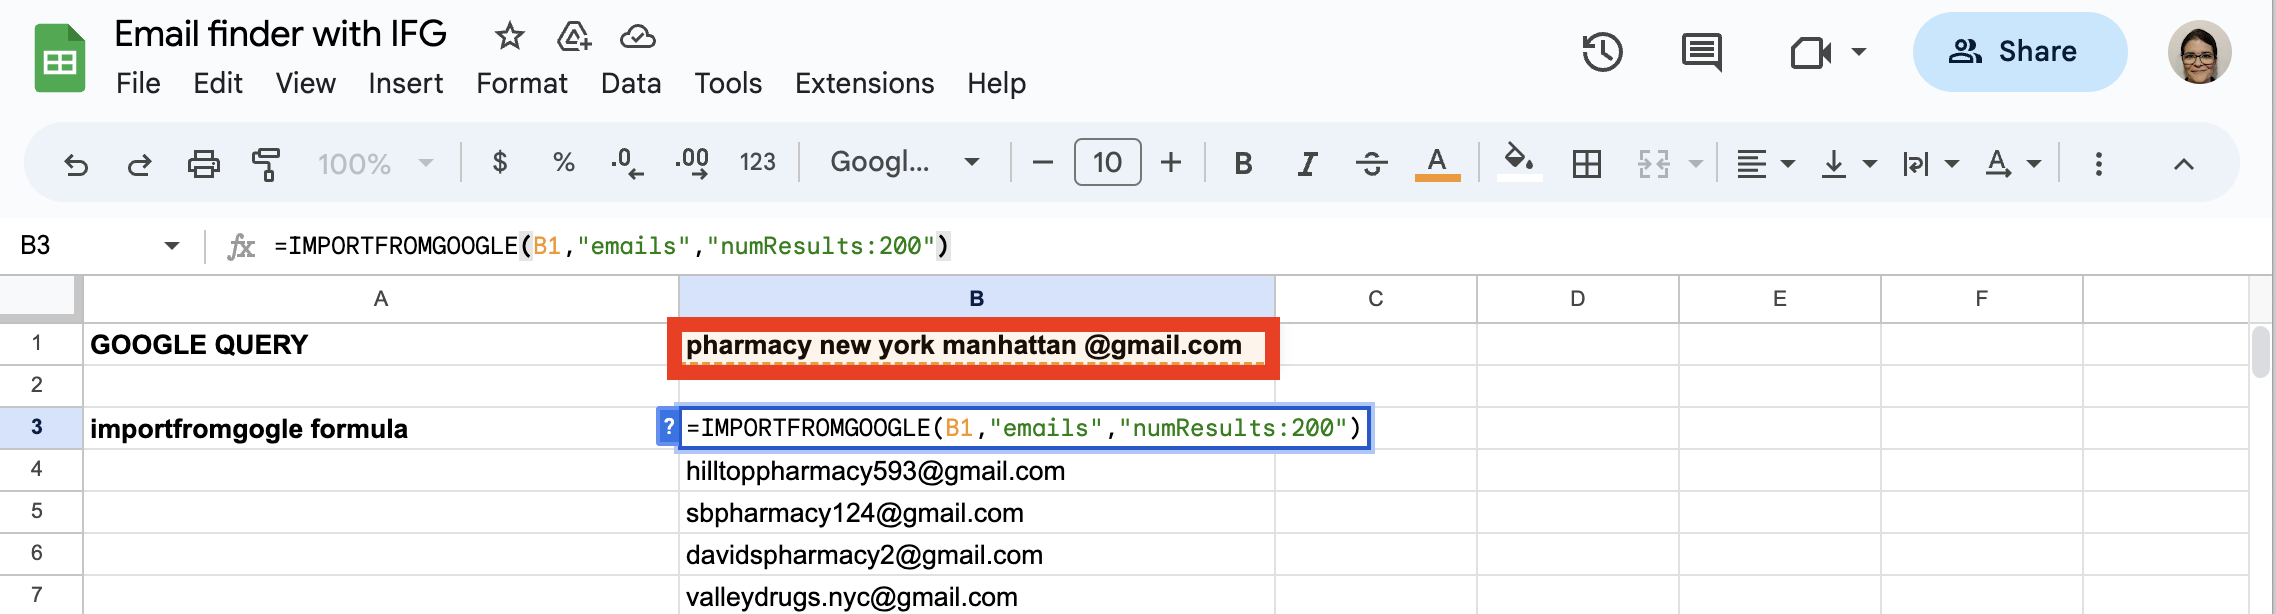 Use IMPORTFROMGOOGLE function to get emails